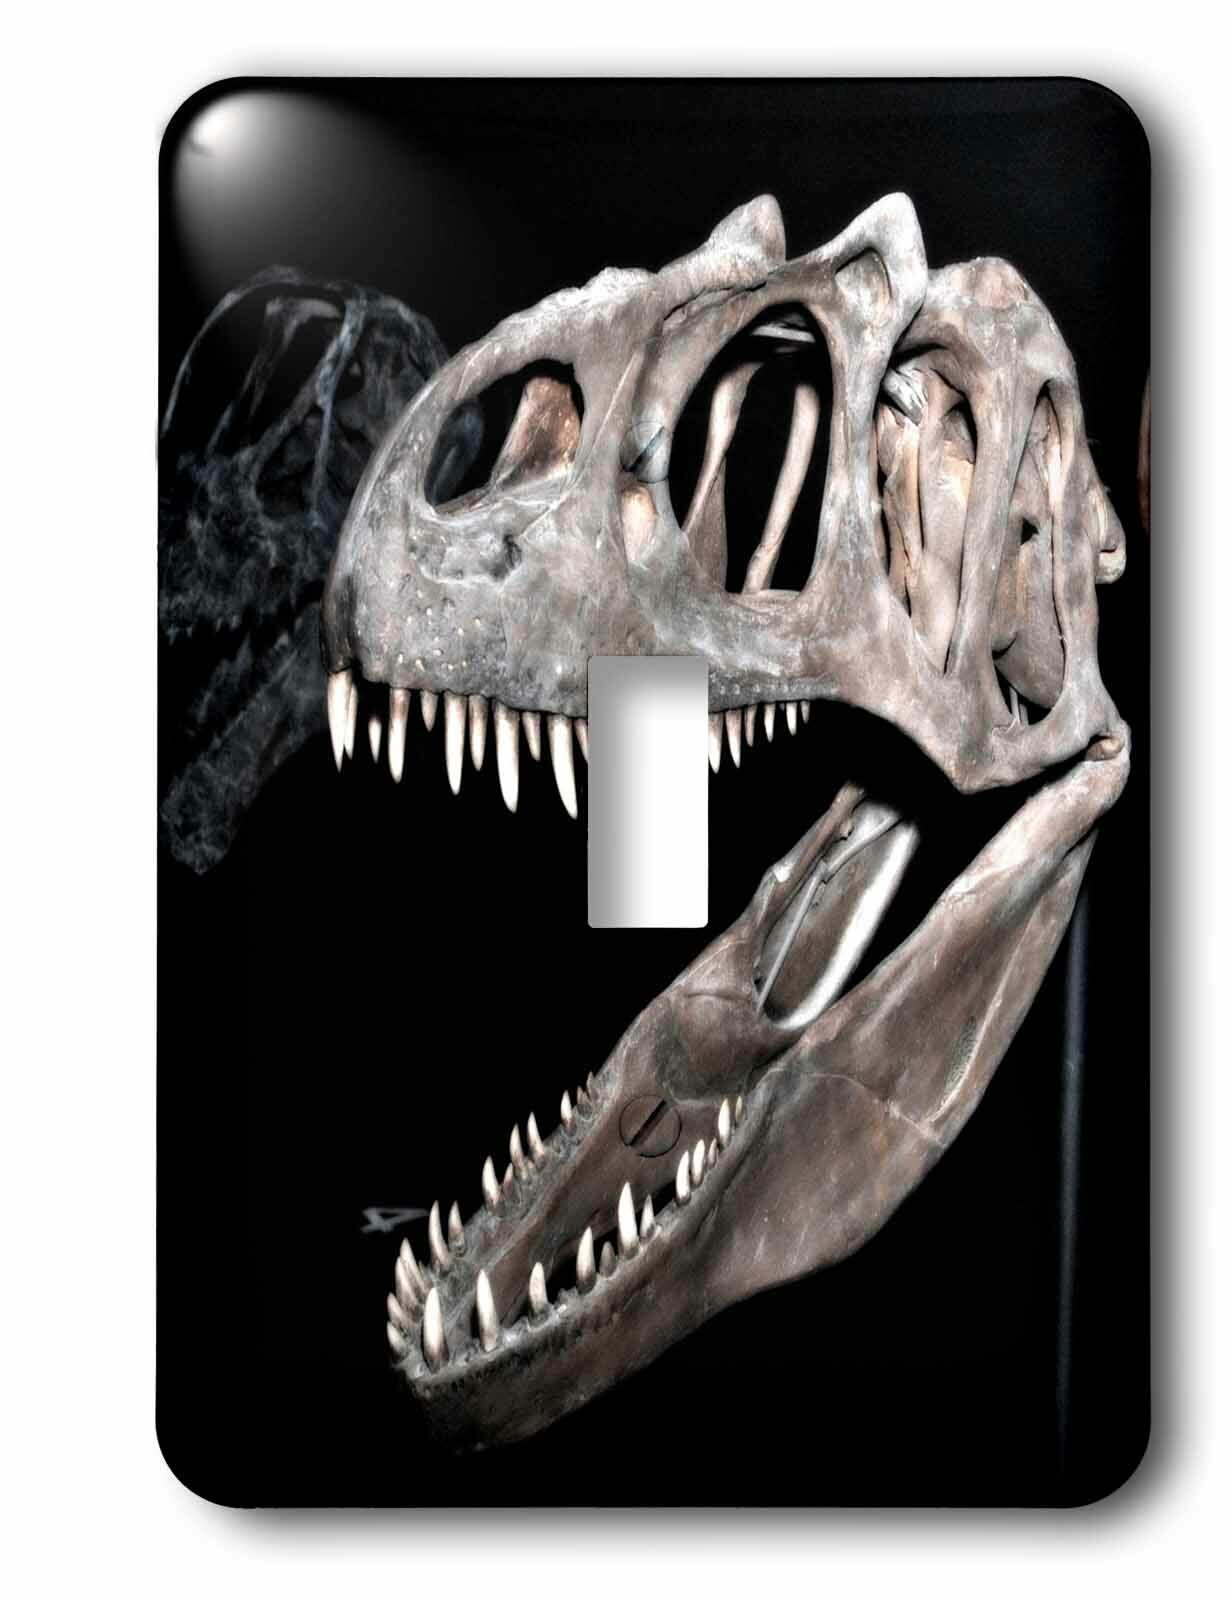 Wall Plate Dino Skeletons Switch Plate Light Switch Cover Decorative Outlet Cover for Living Room Bedroom Kitchen 